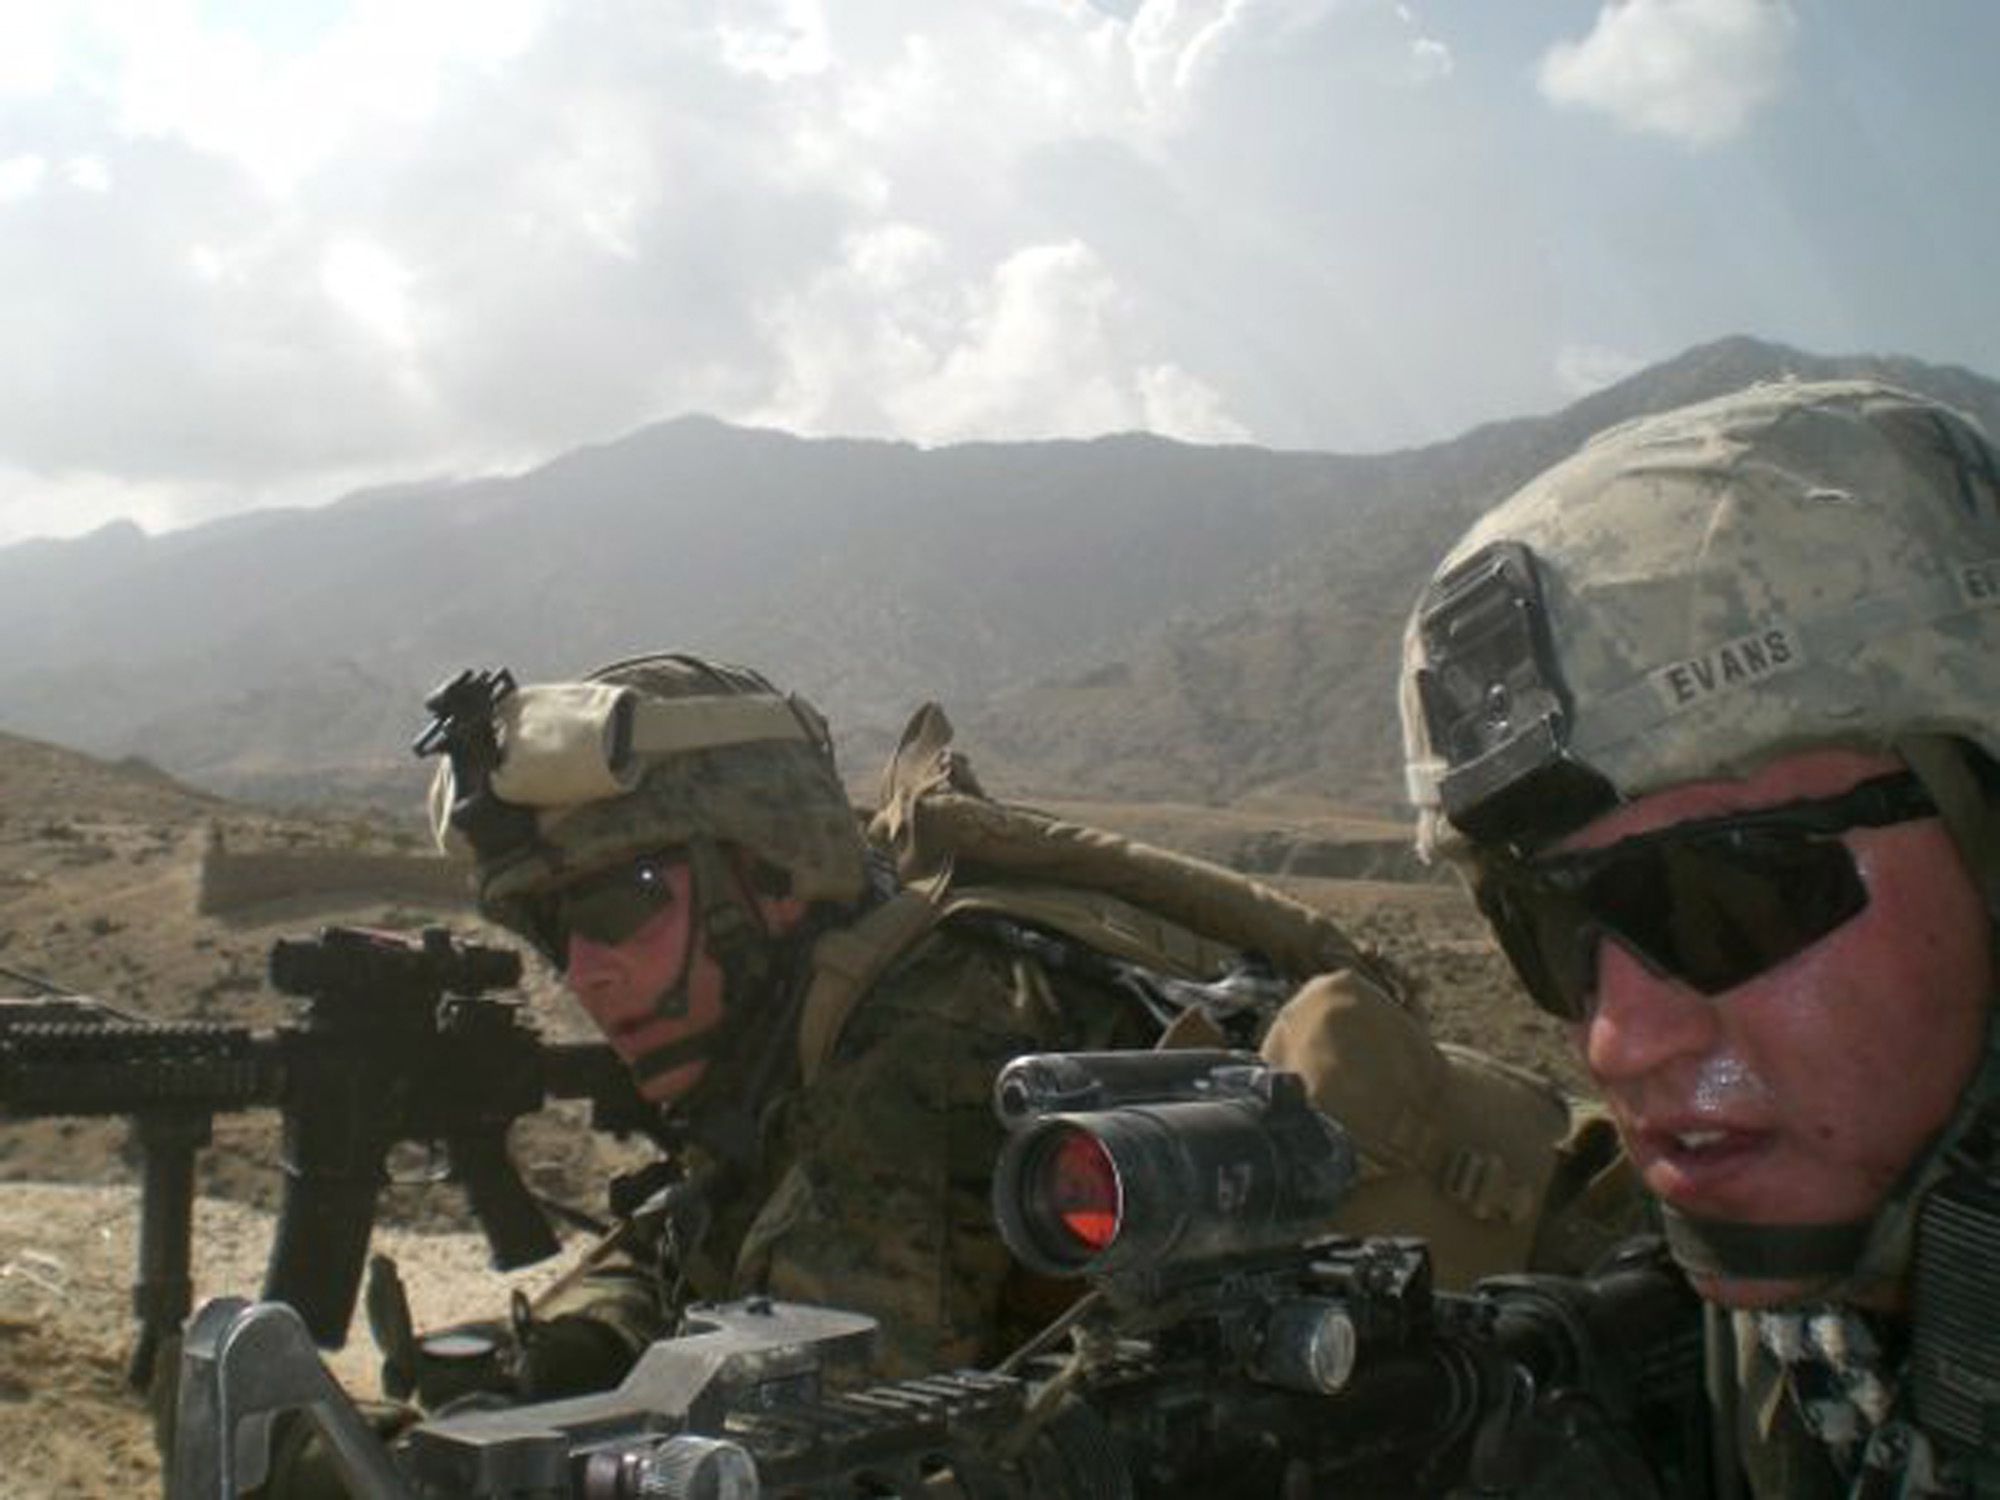 This 2009 photo provided by Lisa Freeman shows her son, Marine Capt. Matthew C. Freeman, left, in Afghanistan. Barely two weeks into his deployment, Freeman and a fire support team set out to do reconnaissance in the Shpee Valley when they came under almost immediate enemy attack and became pinned down. According to an official account, Freeman fought his way into a nearby building and up to the roof to get a better angle on the enemy position. Once atop, he spotted an insurgent with a rocket-propelled grenade and was firing at the man when he was shot in the back of the head.